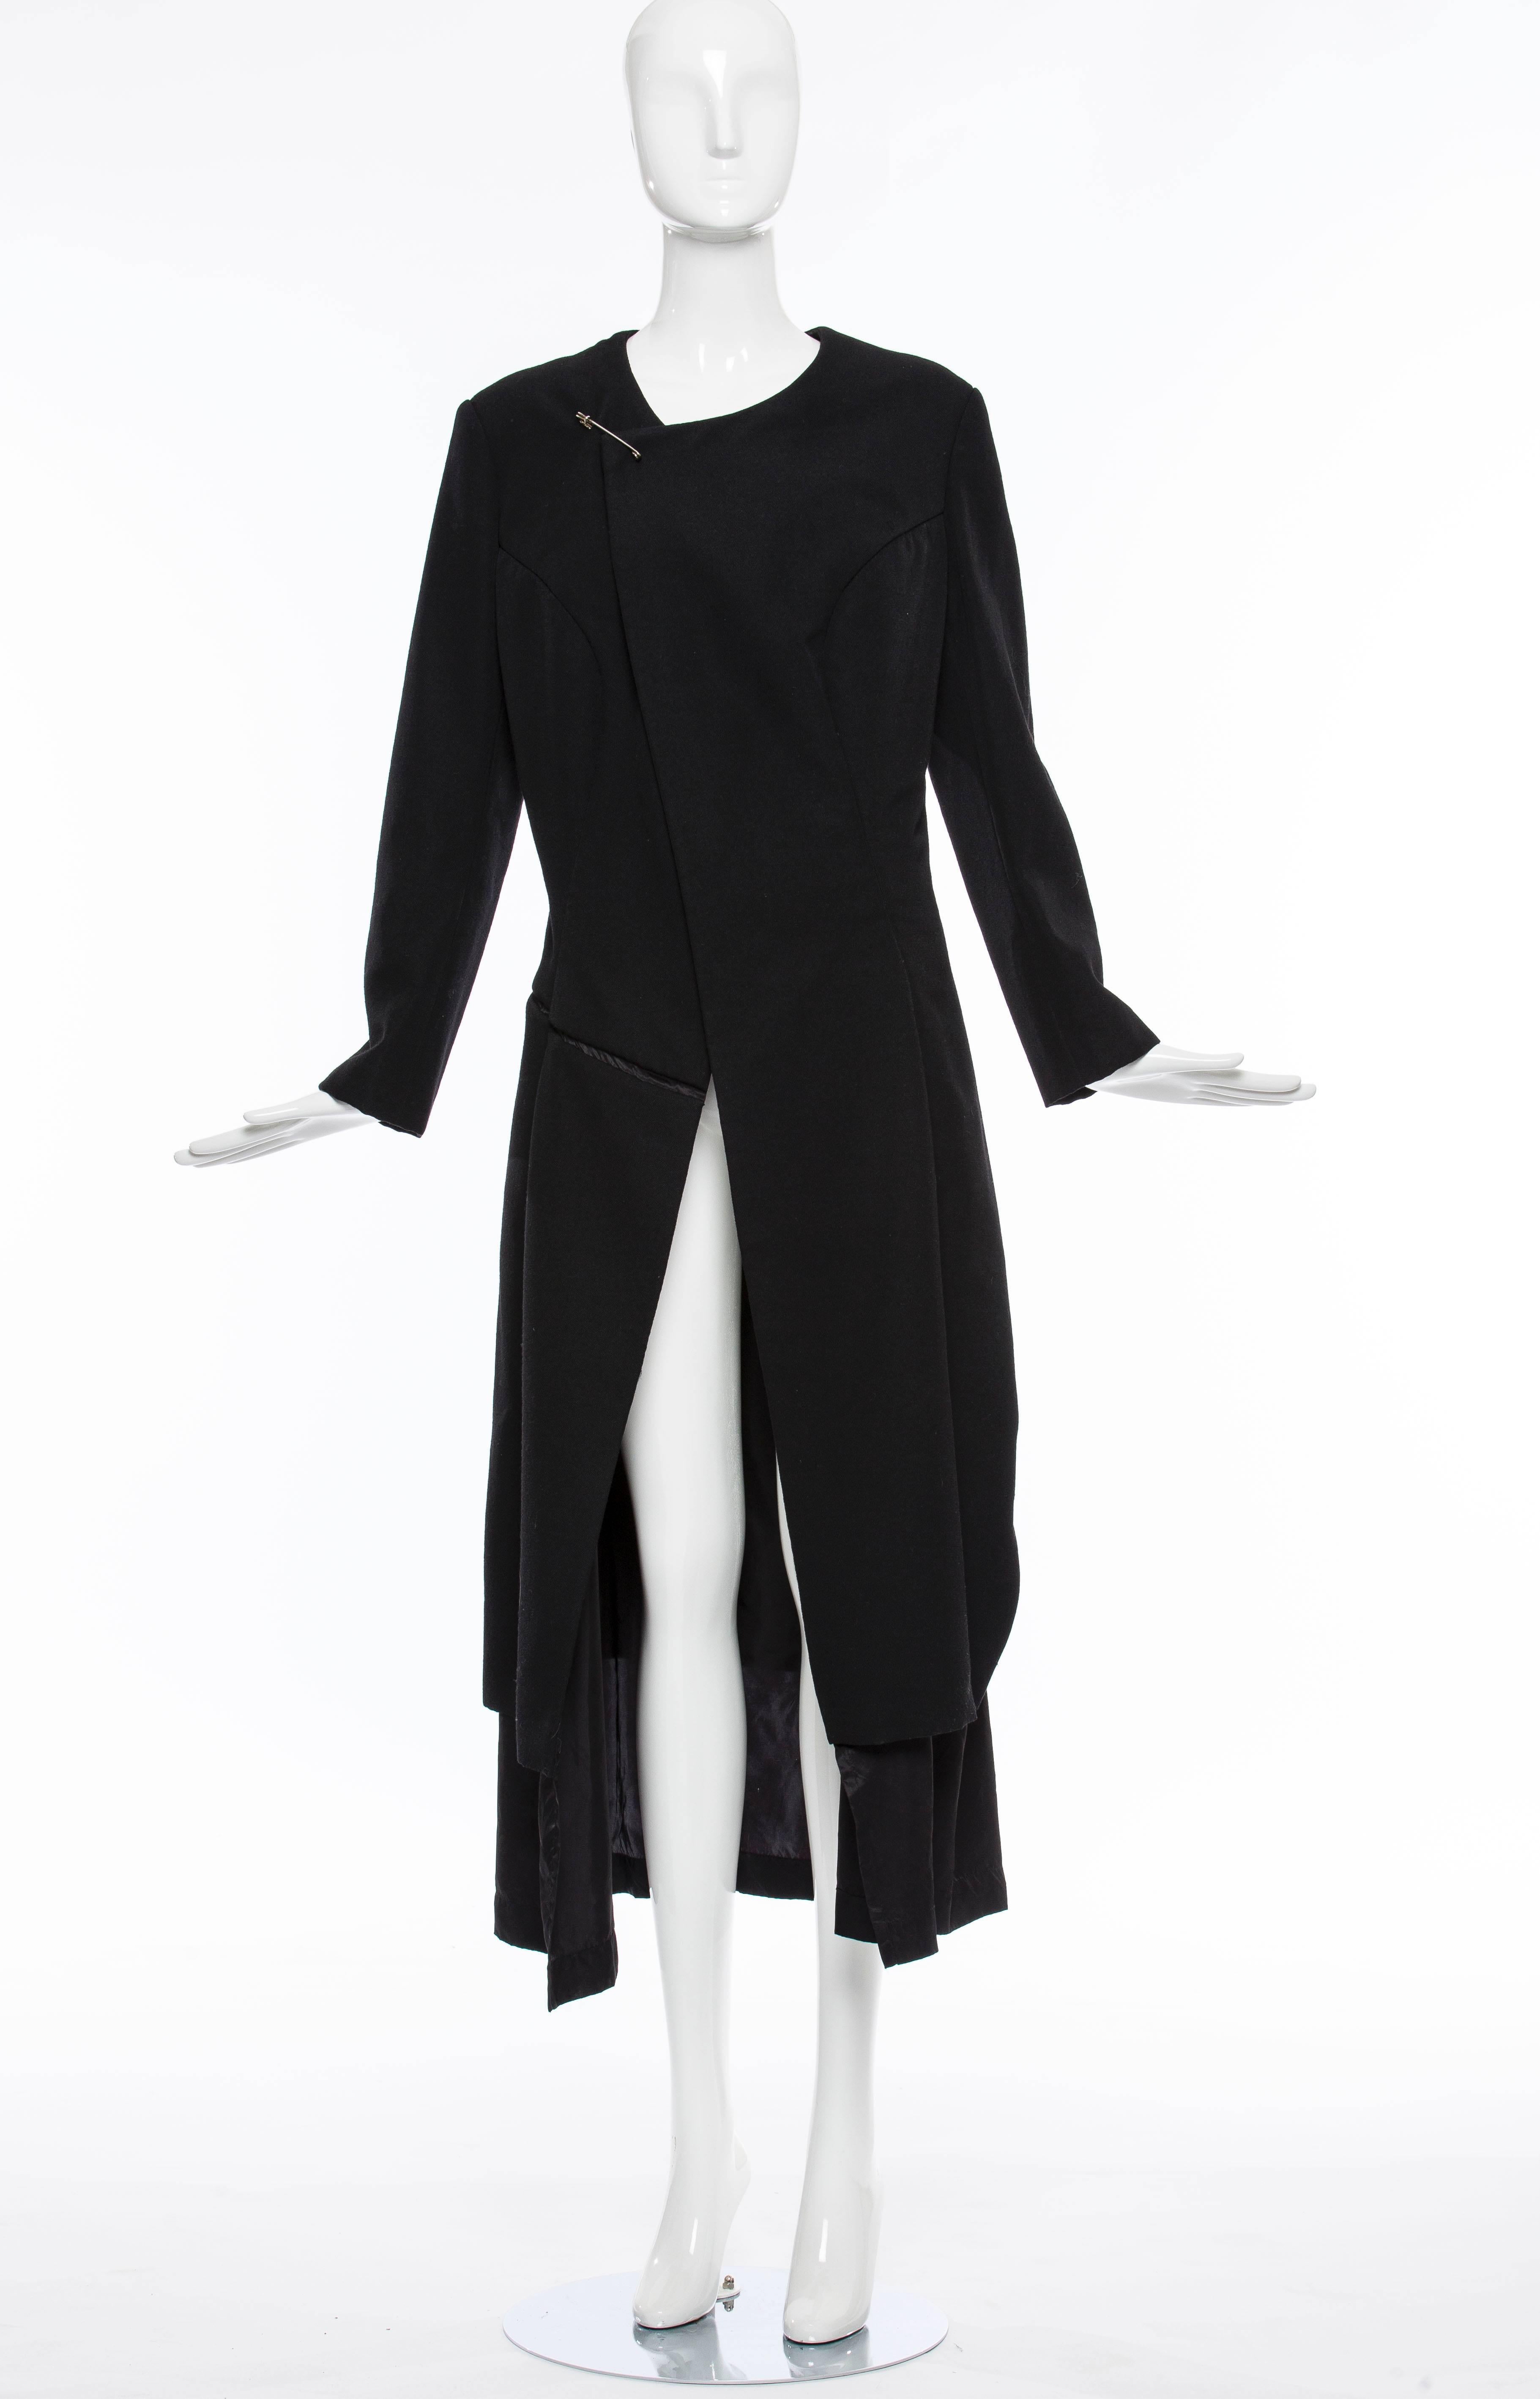  Comme des Garçons, circa 1997 black wool coat with asymmetrical neckline, long sleeves, tonal stitching throughout and safety pin closure at front.

Bust 38”, Waist 33”, Shoulder 17.5”, Length 45.5”, Sleeve 28.5”